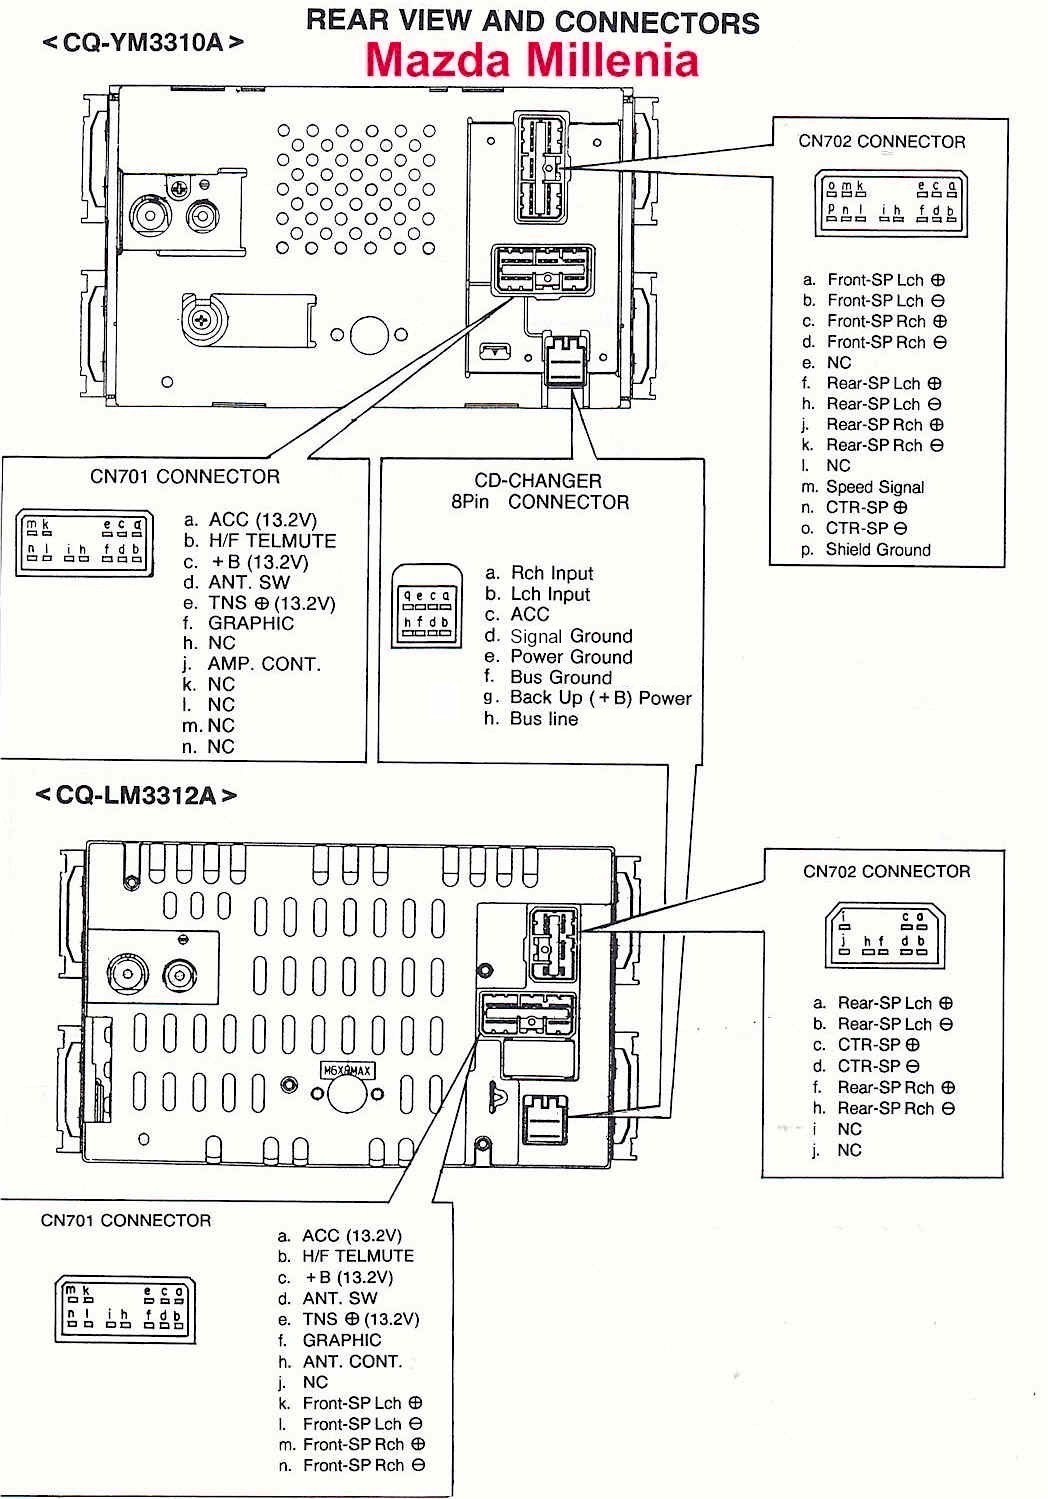 Car Stereo Wire Color Codes - Wire Diagrams and Wire Codes  2002 Mazda Radio Wiring Diagram    Car Stereo Removal